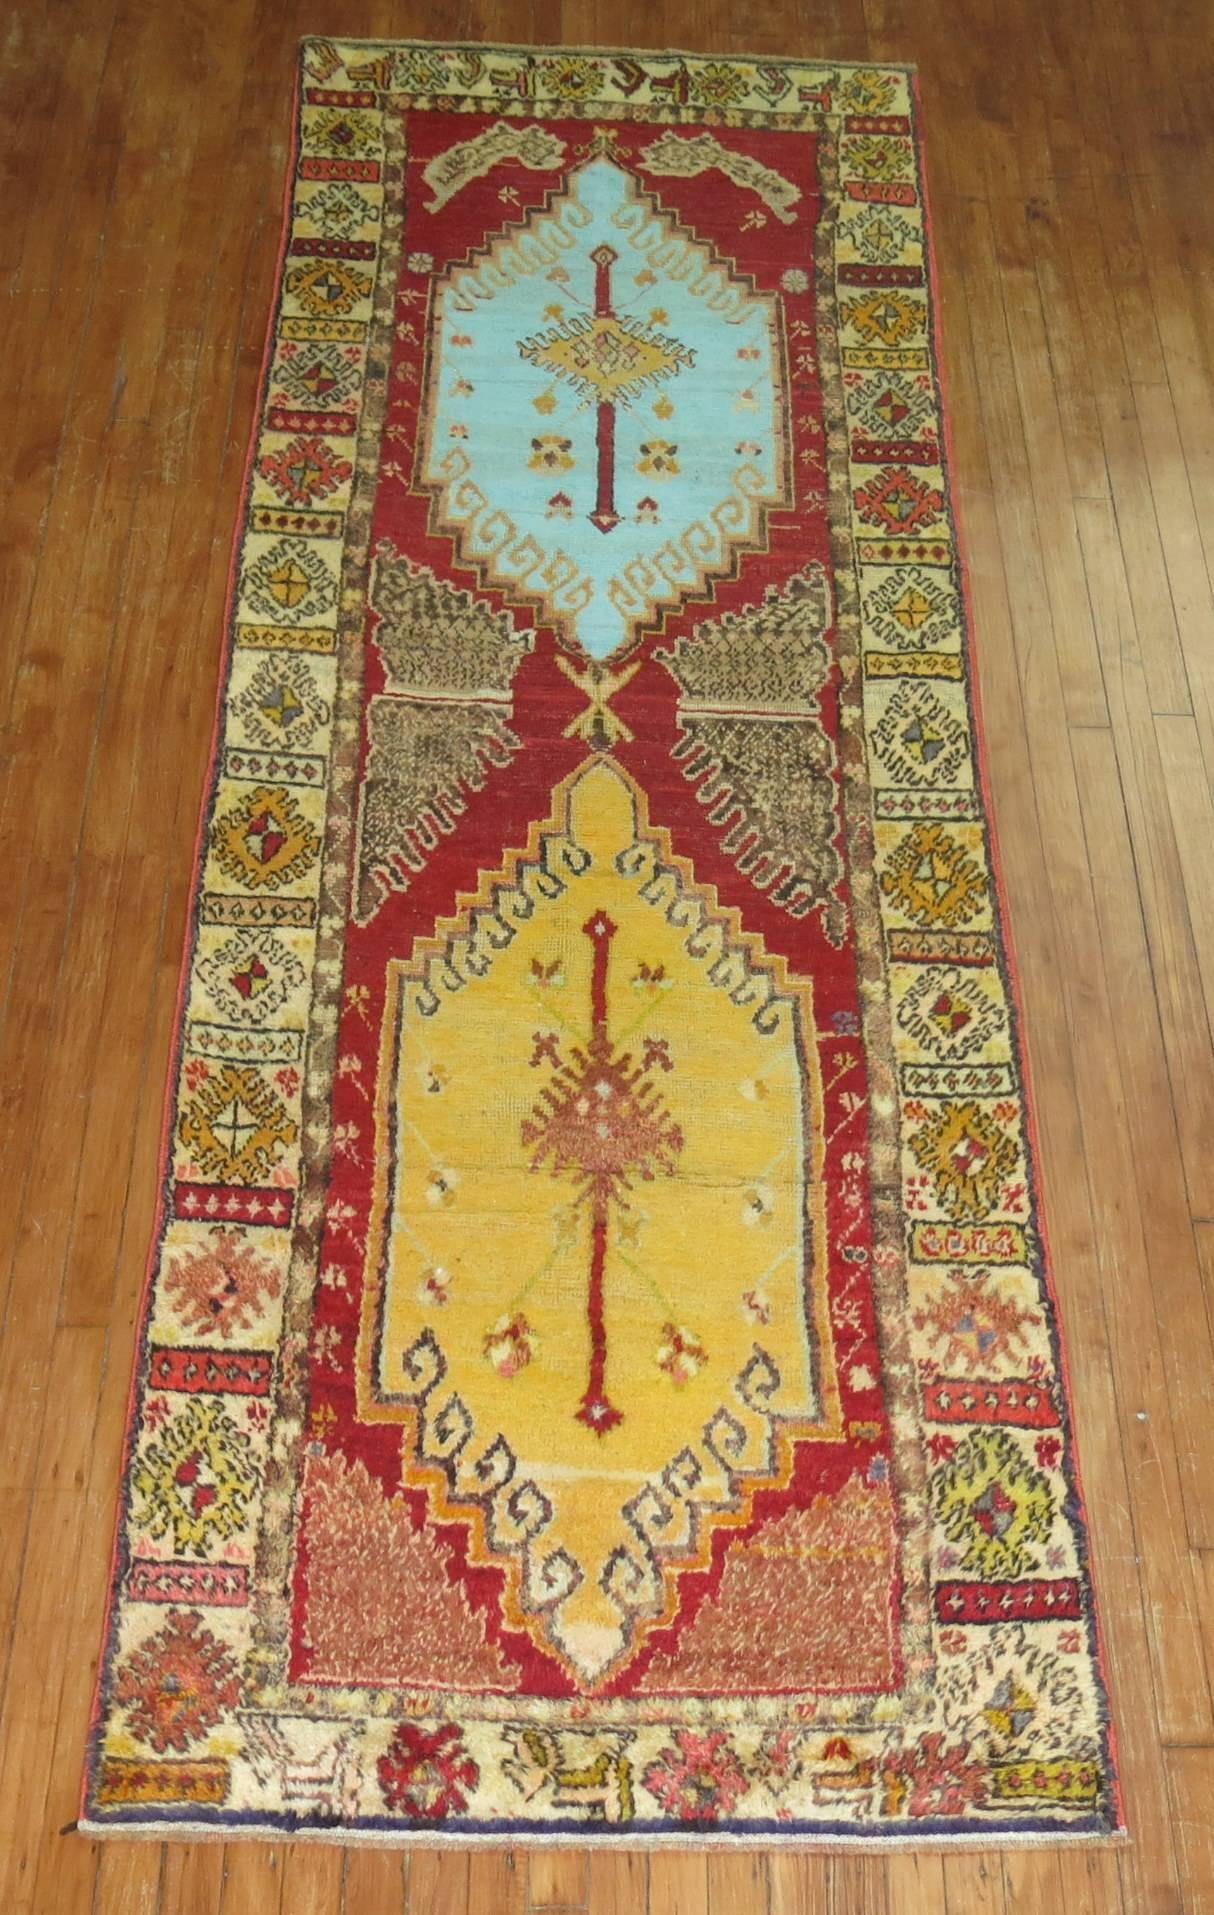 A mid-20th century geometric Turkish runner featuring bright colors with one medallion in an electric blue color. The field is a bright red. Condition and pile are very good

Measures: 3'4